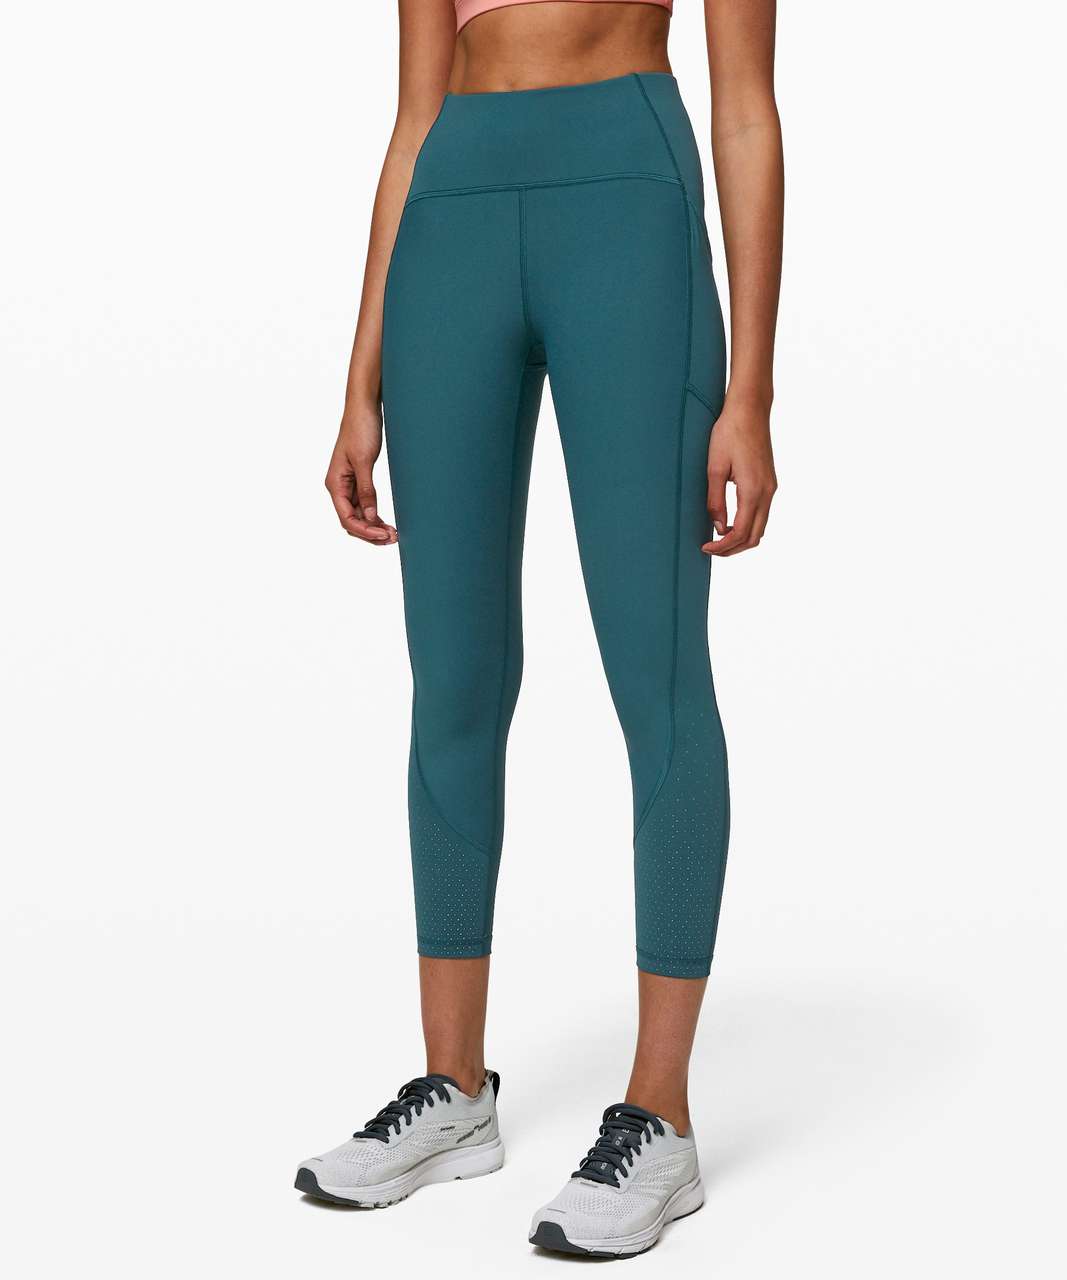 Lululemon Zoned In Tight Size 4, Women's Fashion, Clothes on Carousell